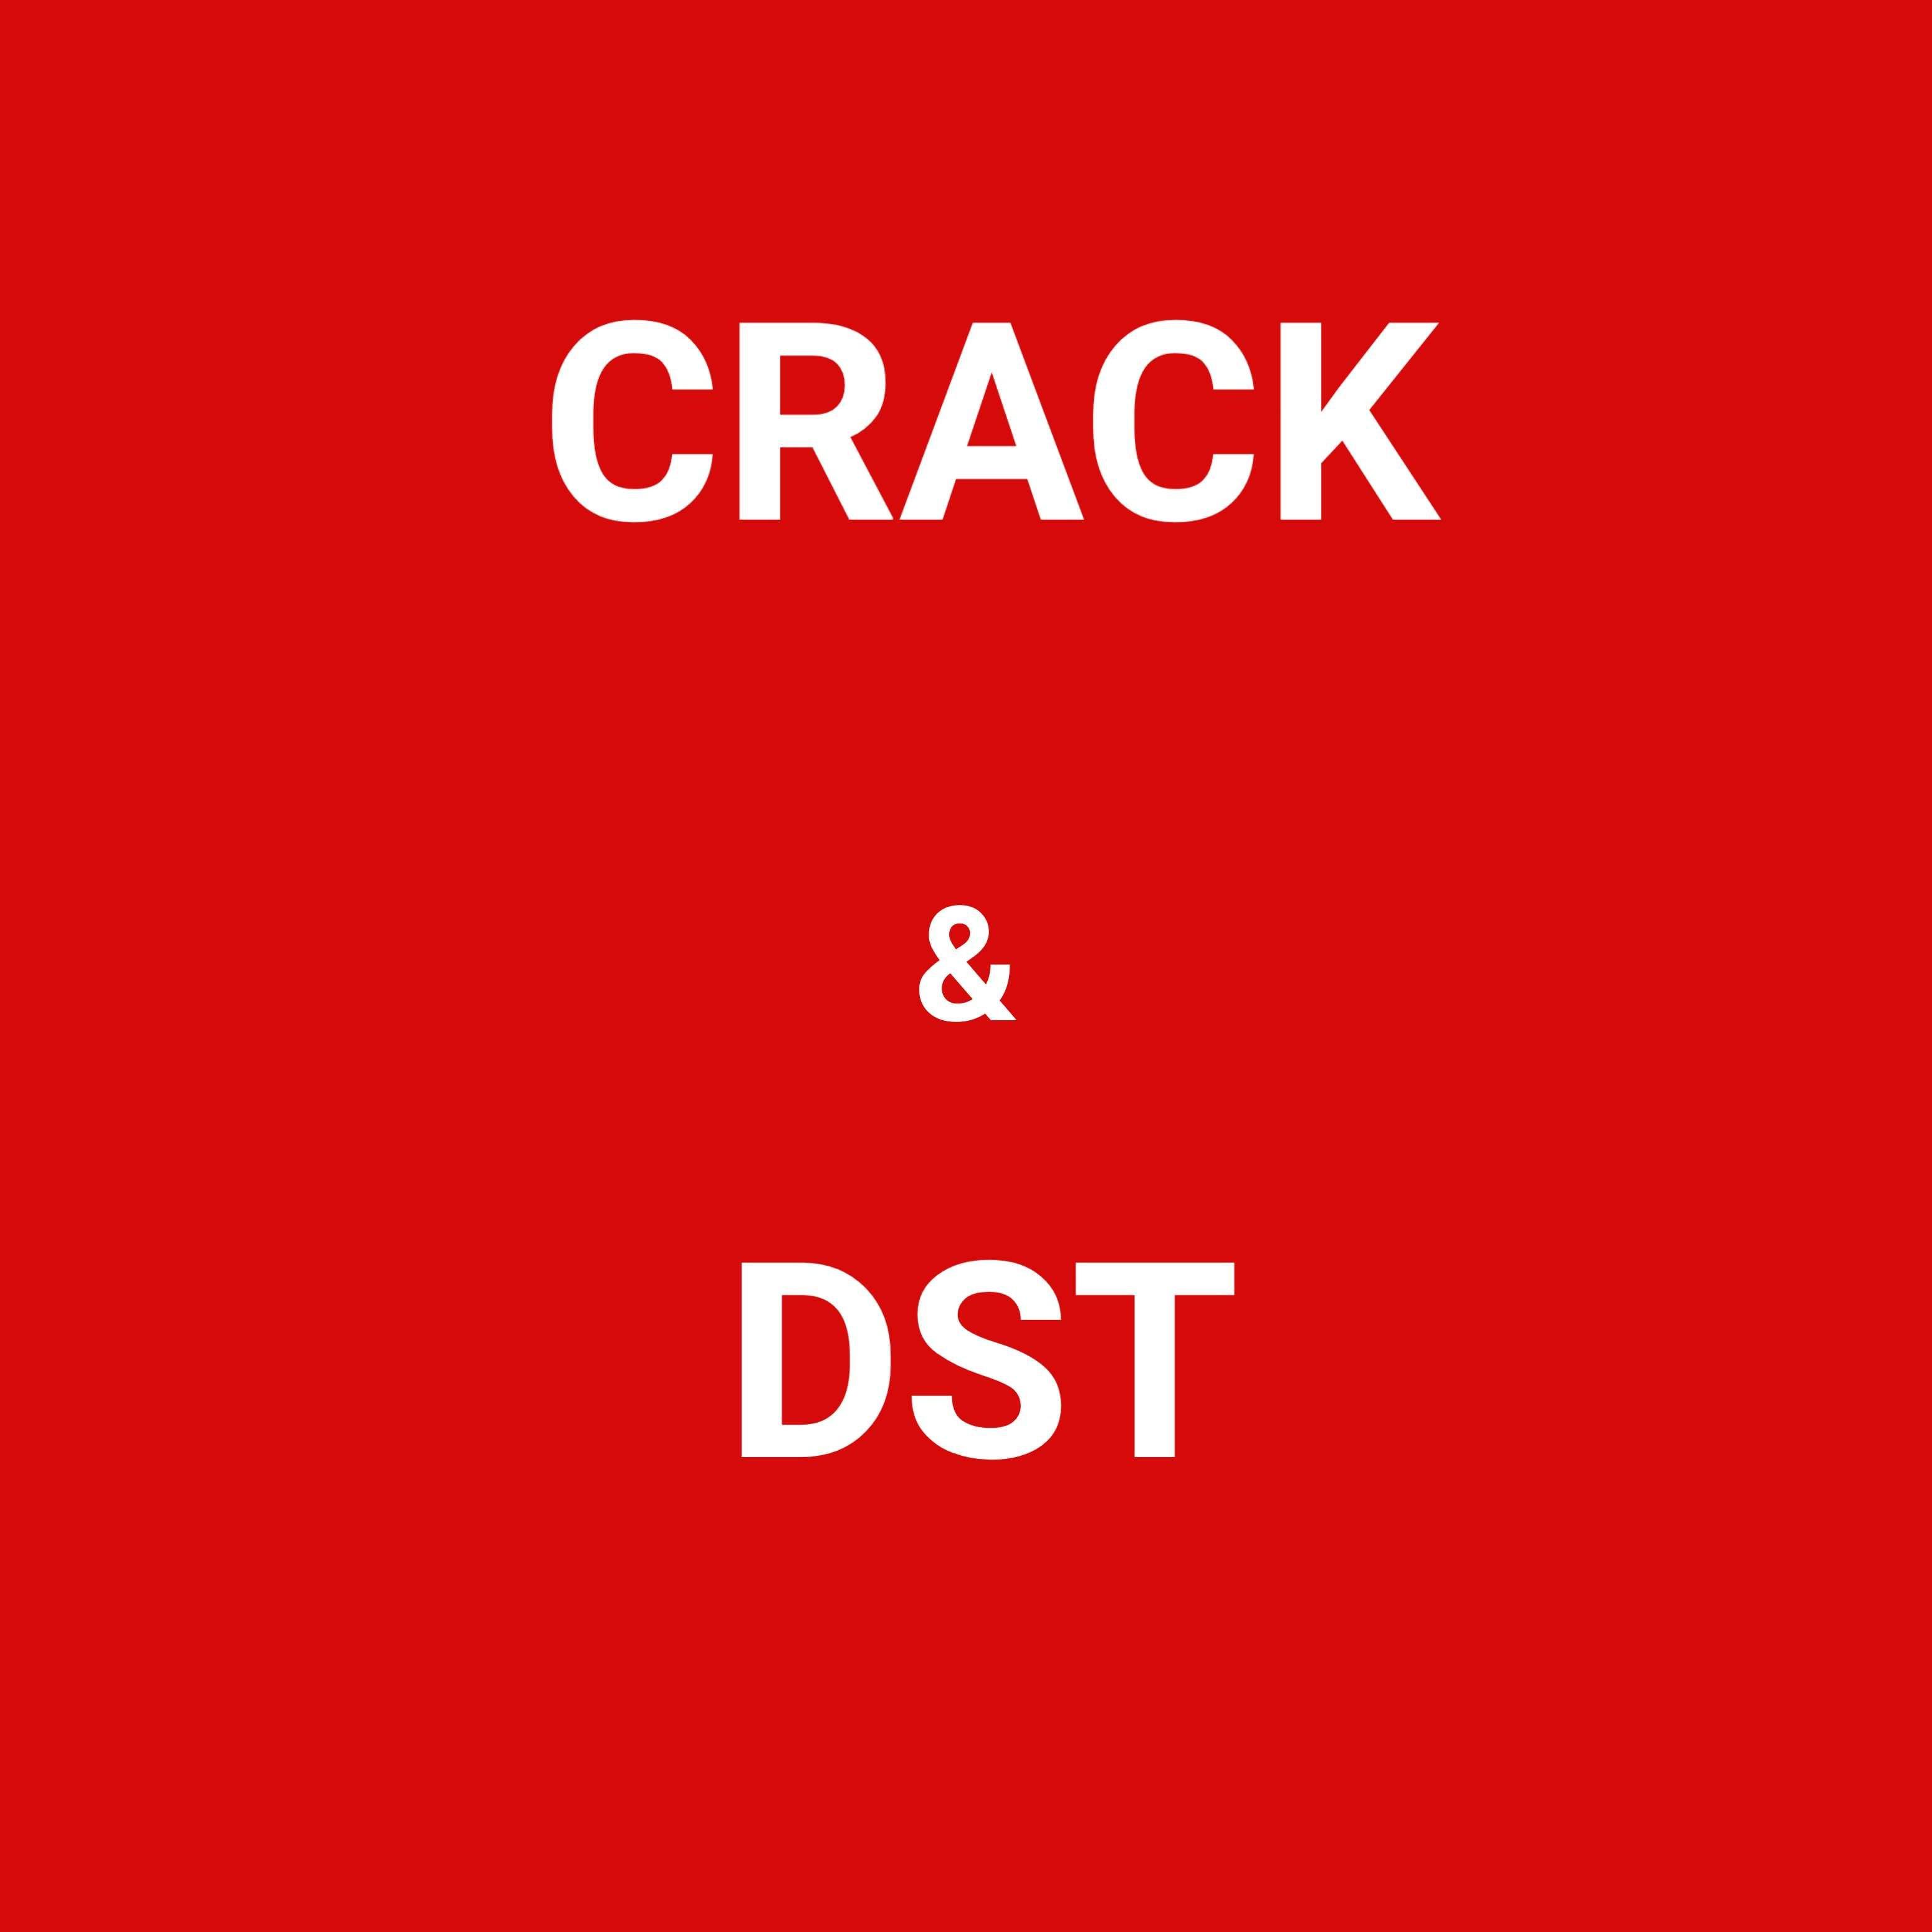 Crack and Dst